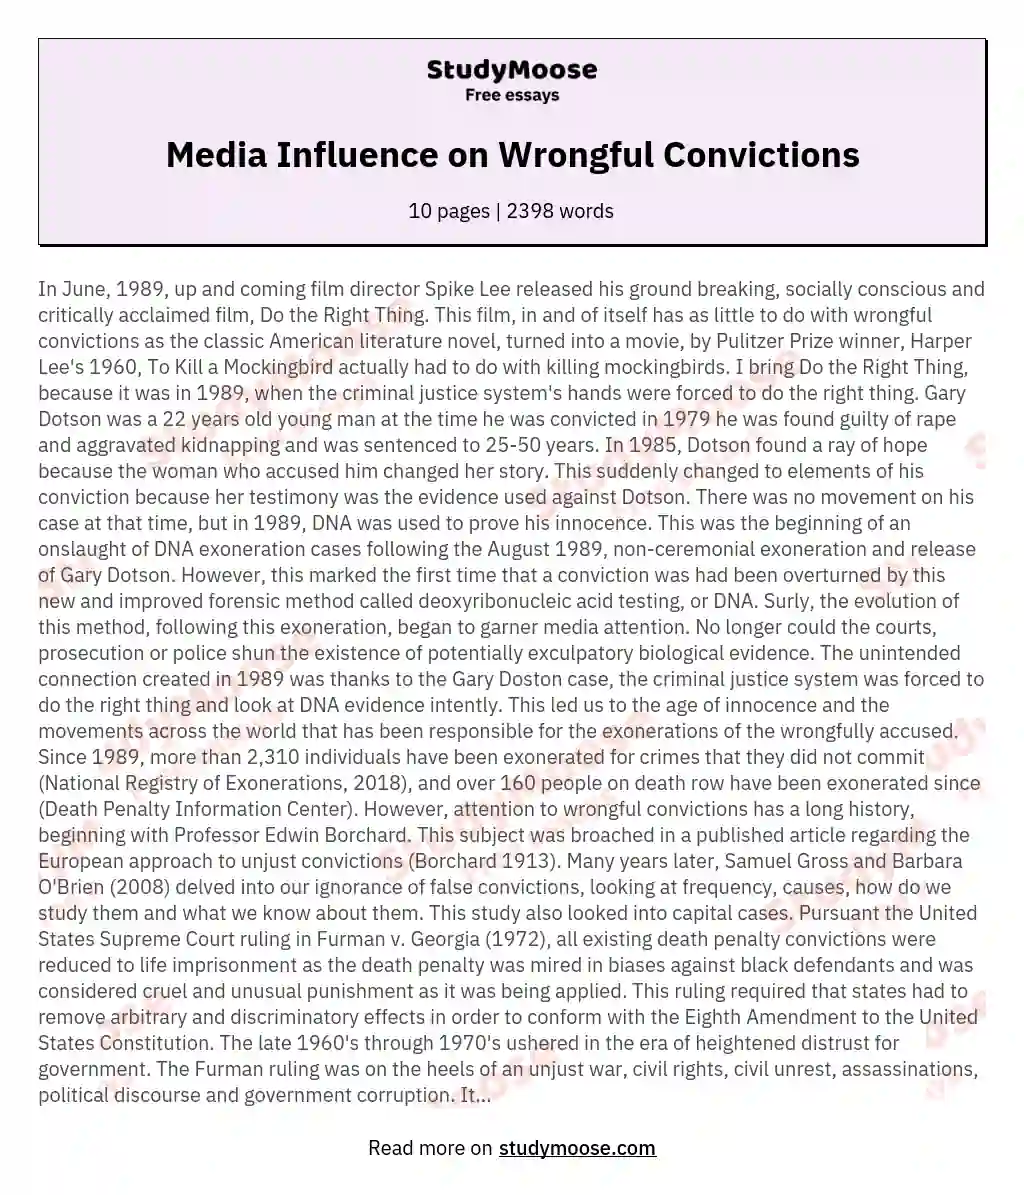 Media Influence on Wrongful Convictions essay